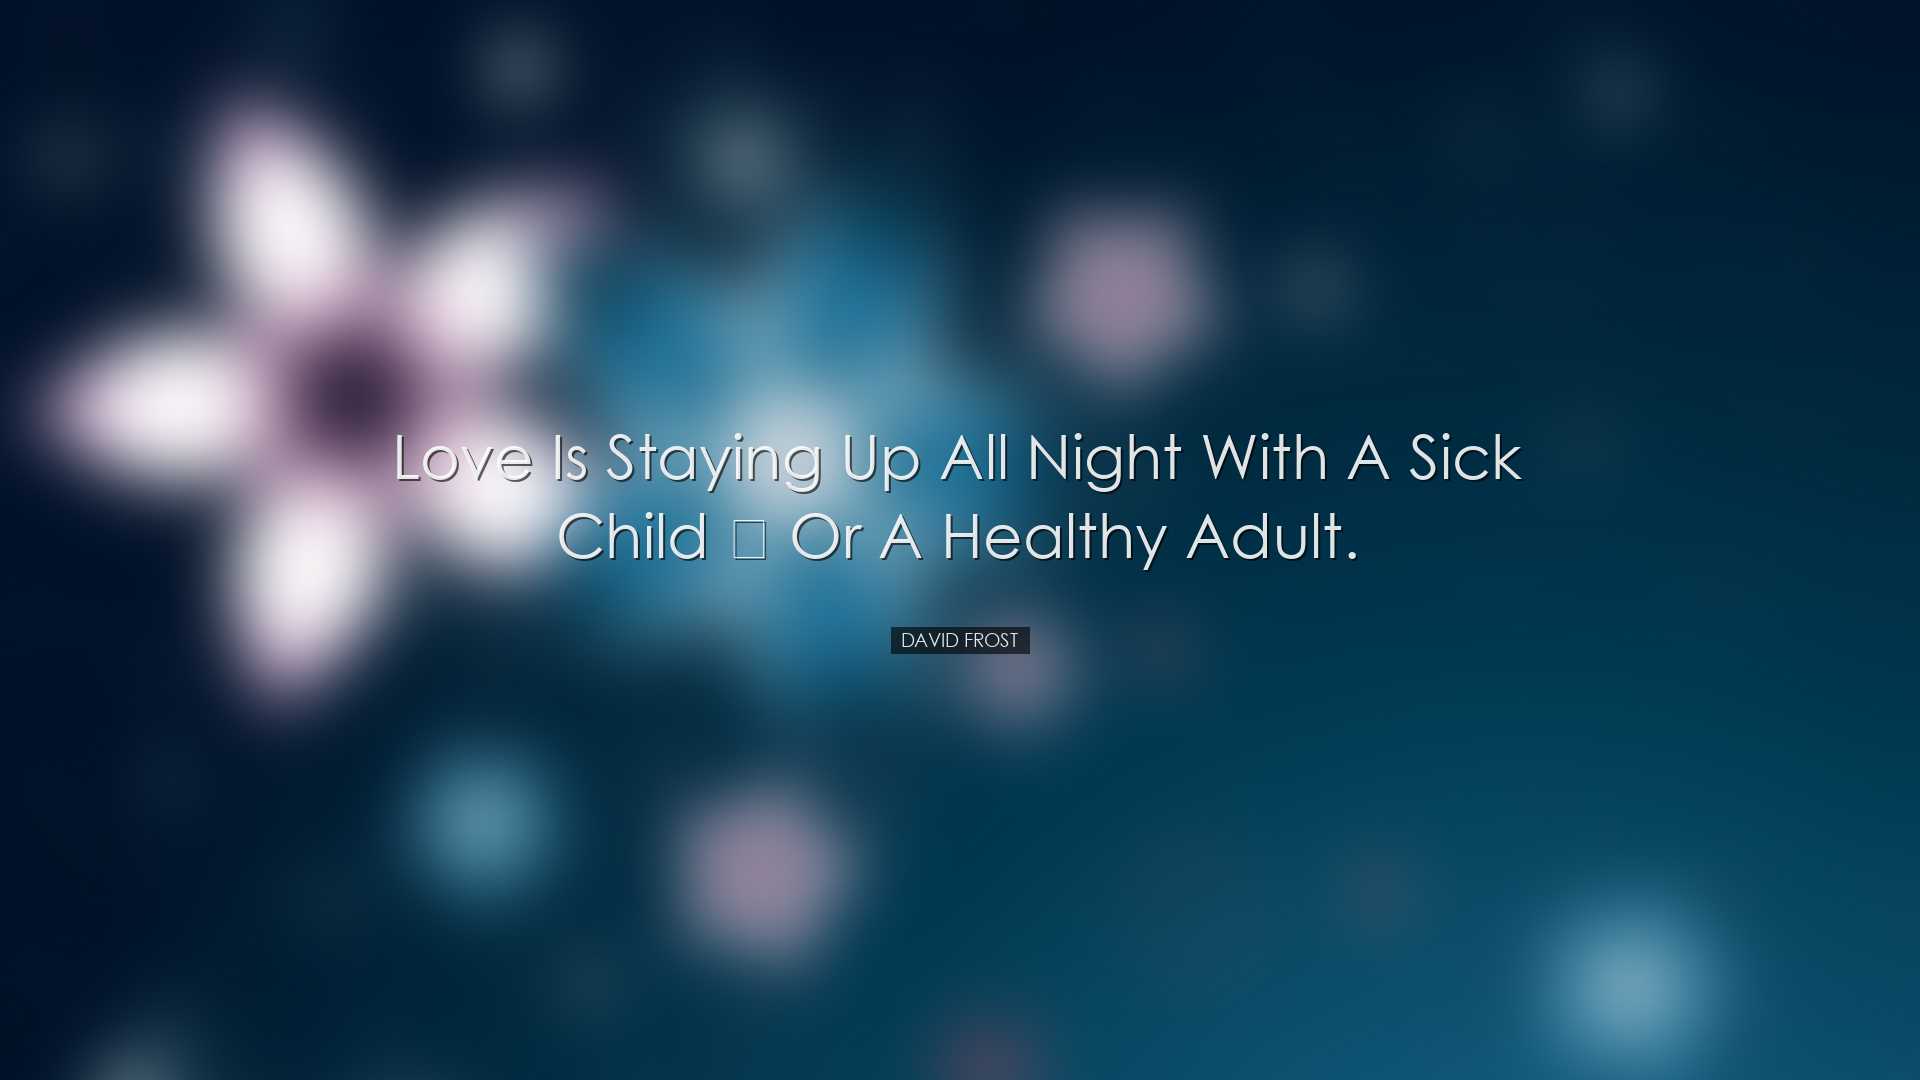 Love is staying up all night with a sick child — or a healthy ad